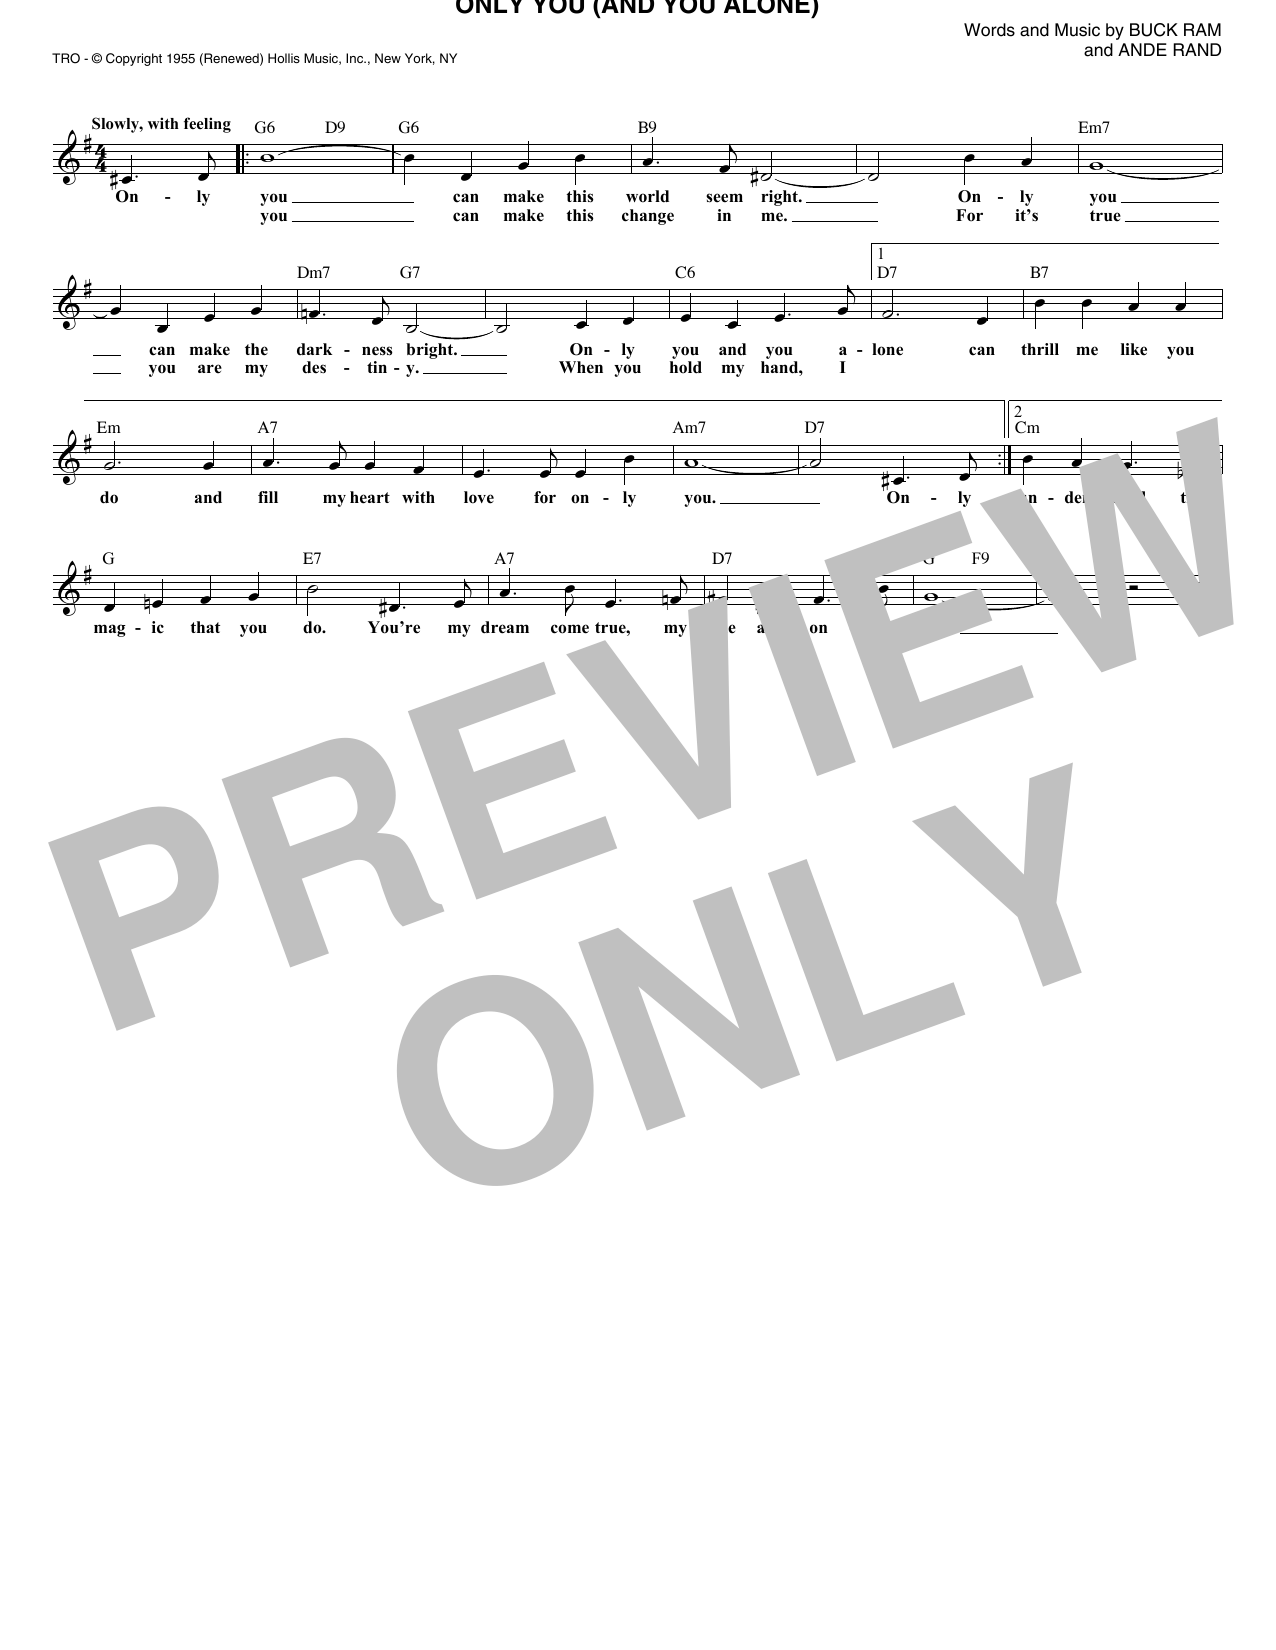 Download The Platters Only You (And You Alone) Sheet Music